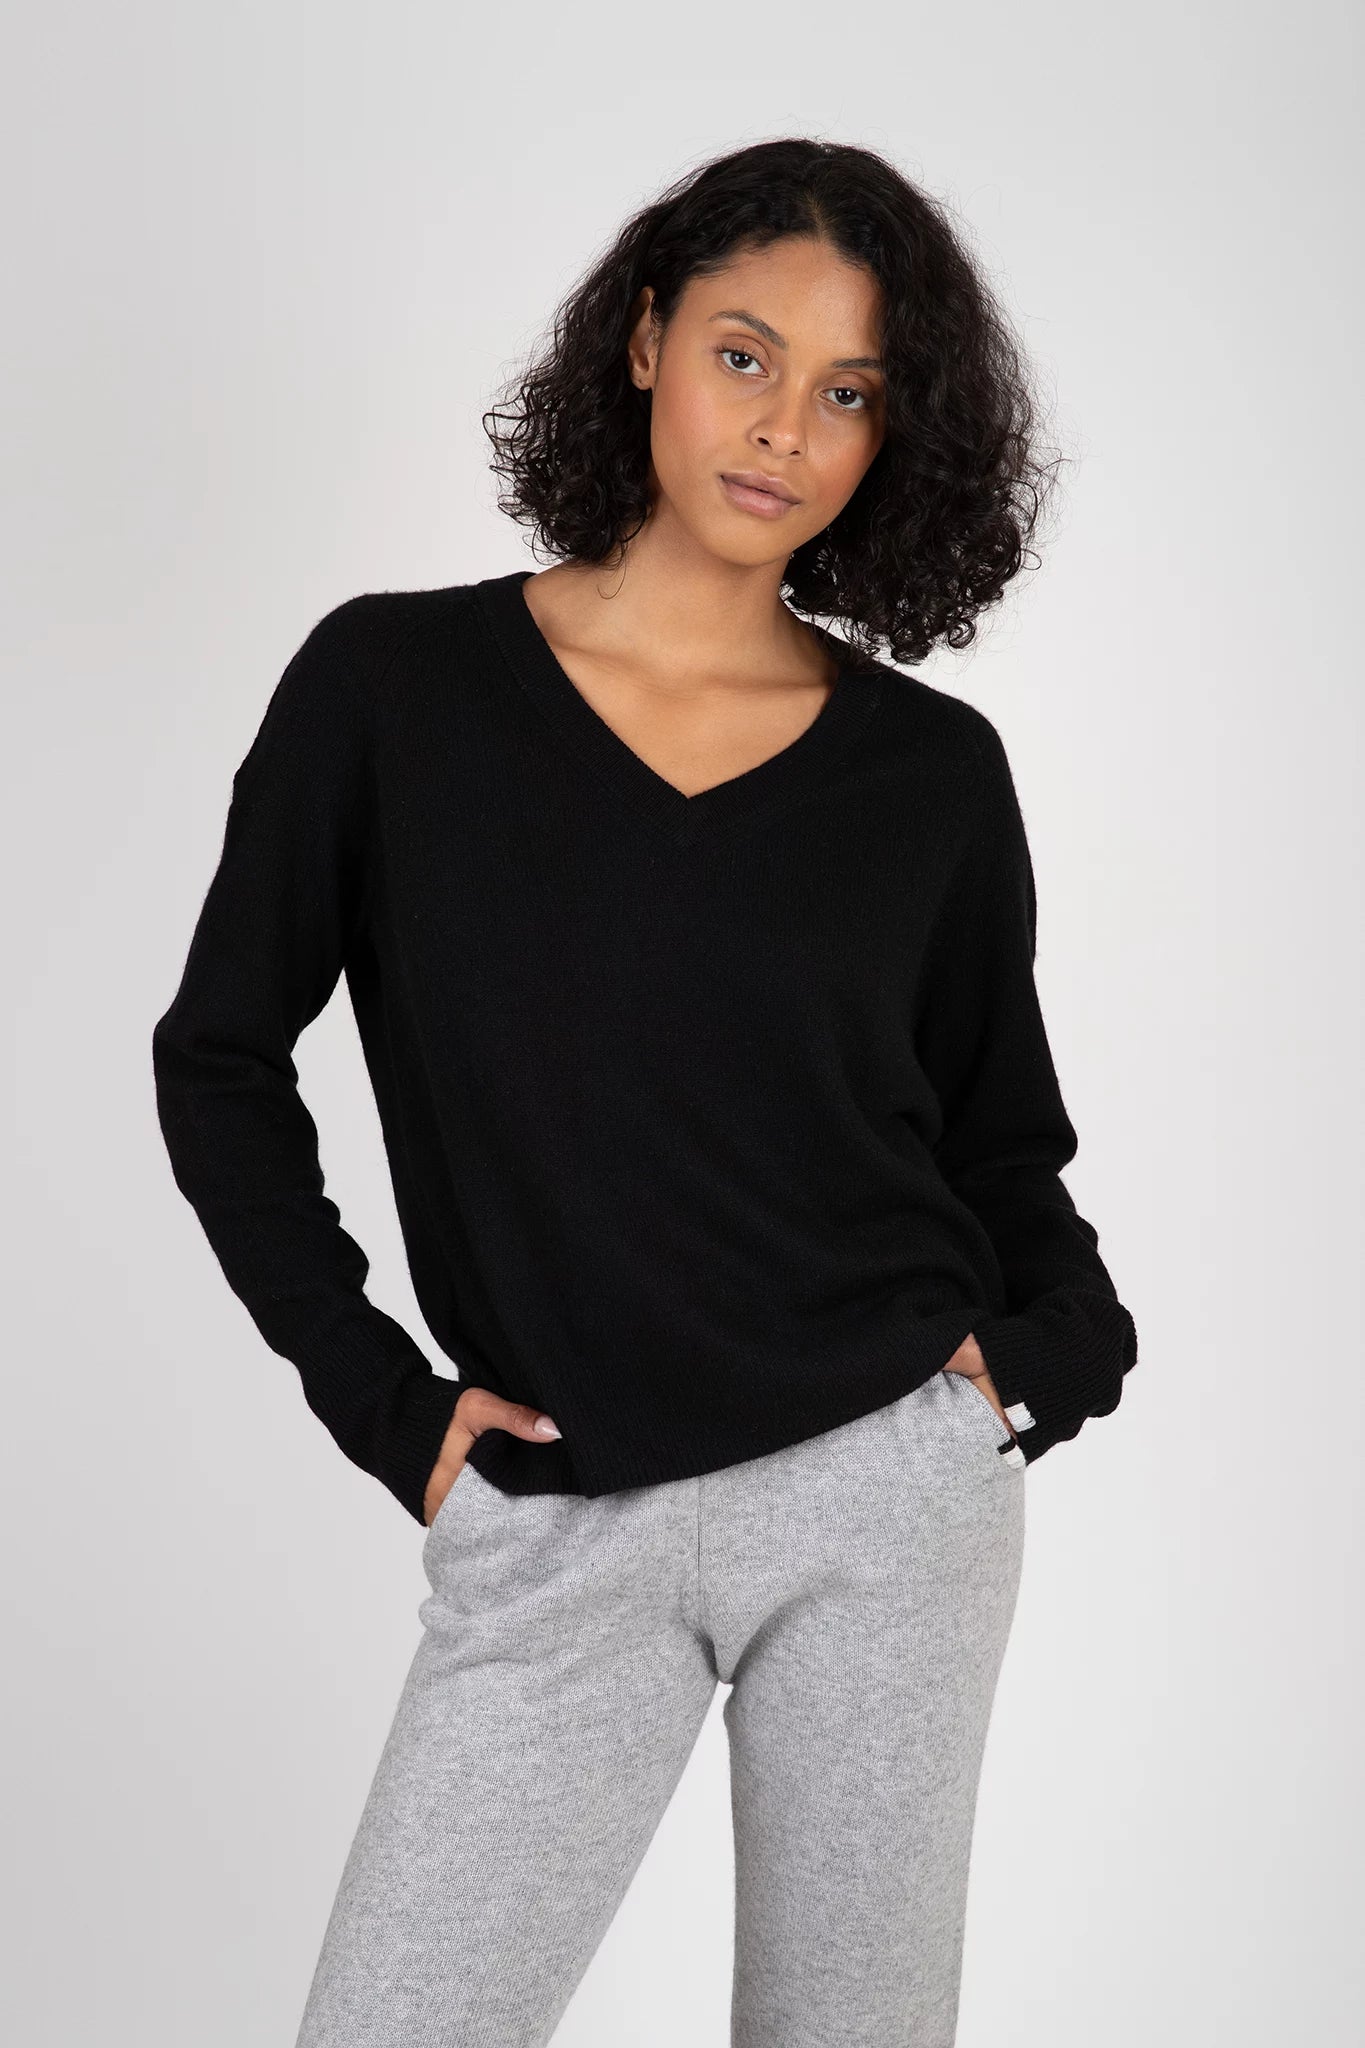 Sloane Cashmere V-Neck Sweaters & Knits One Grey Day   